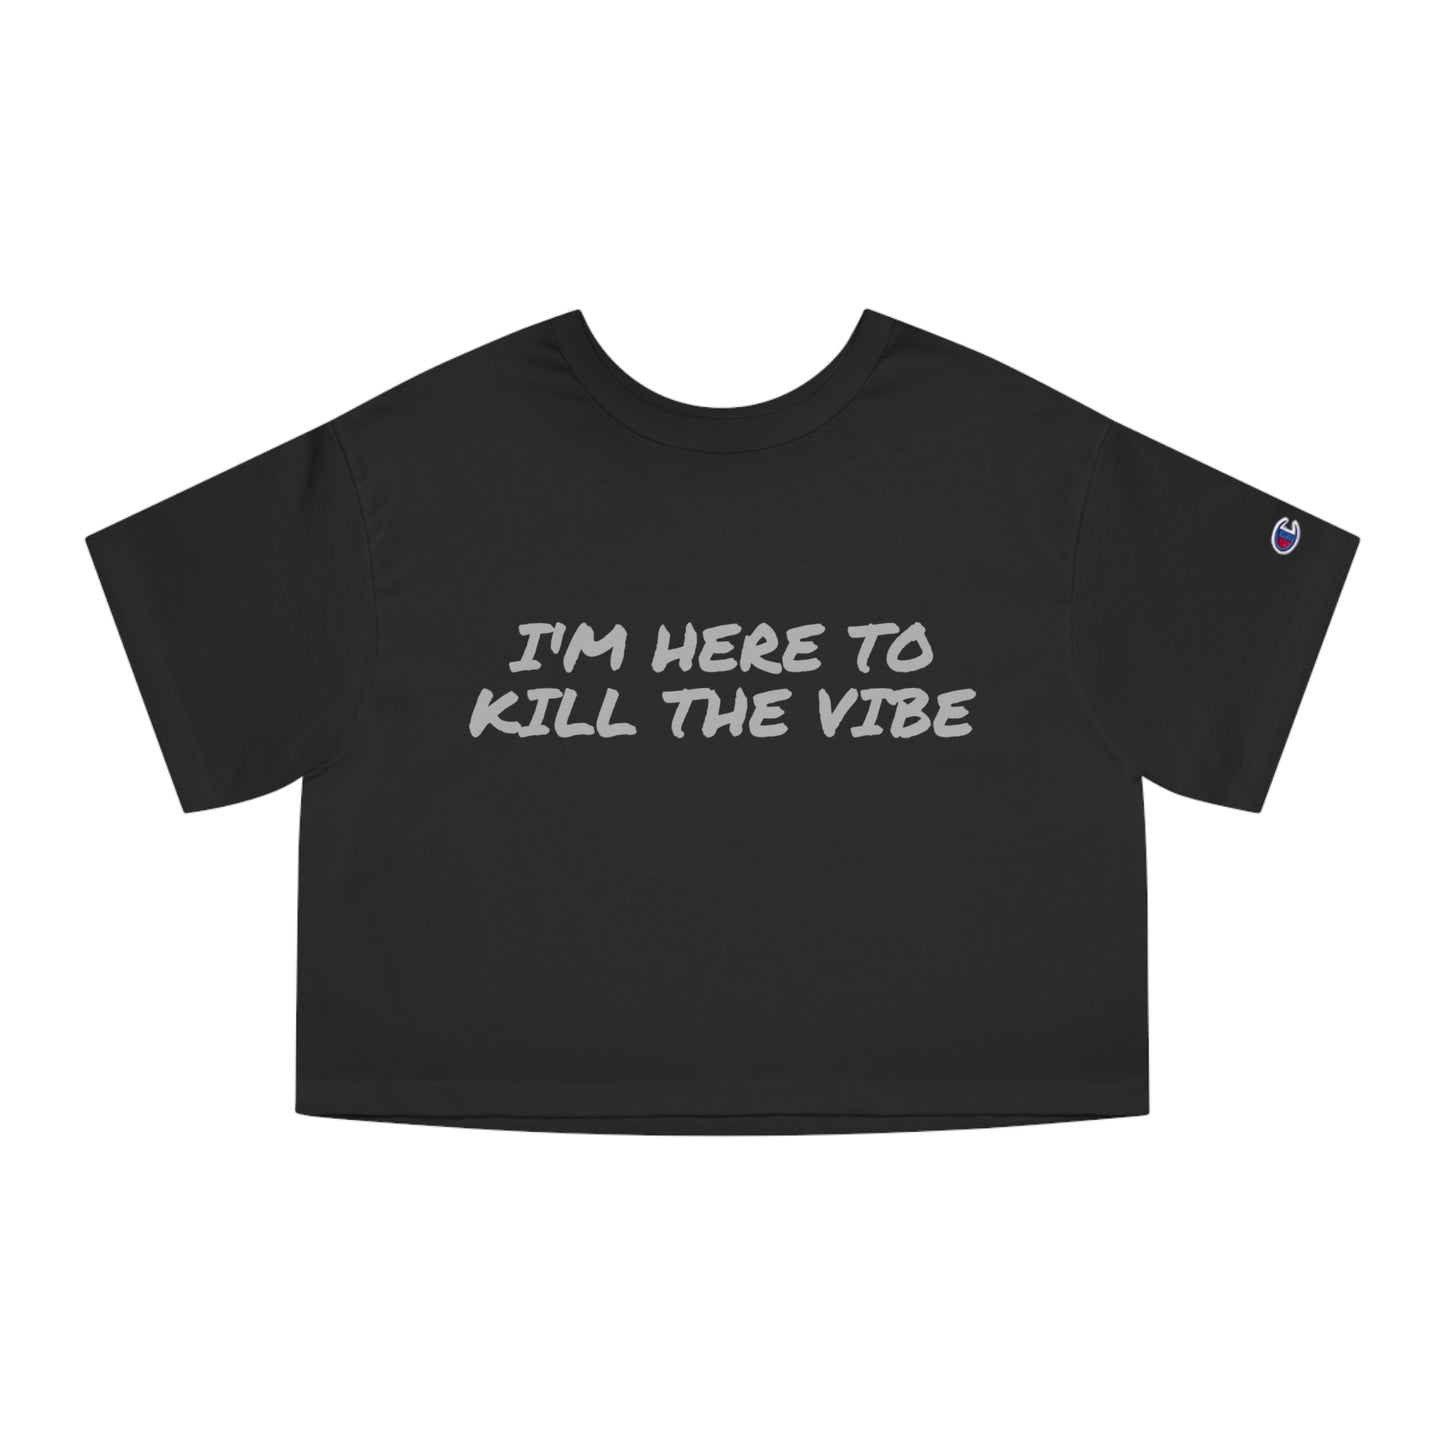 "I'm here to kill the vibe" - Champion™ crop top